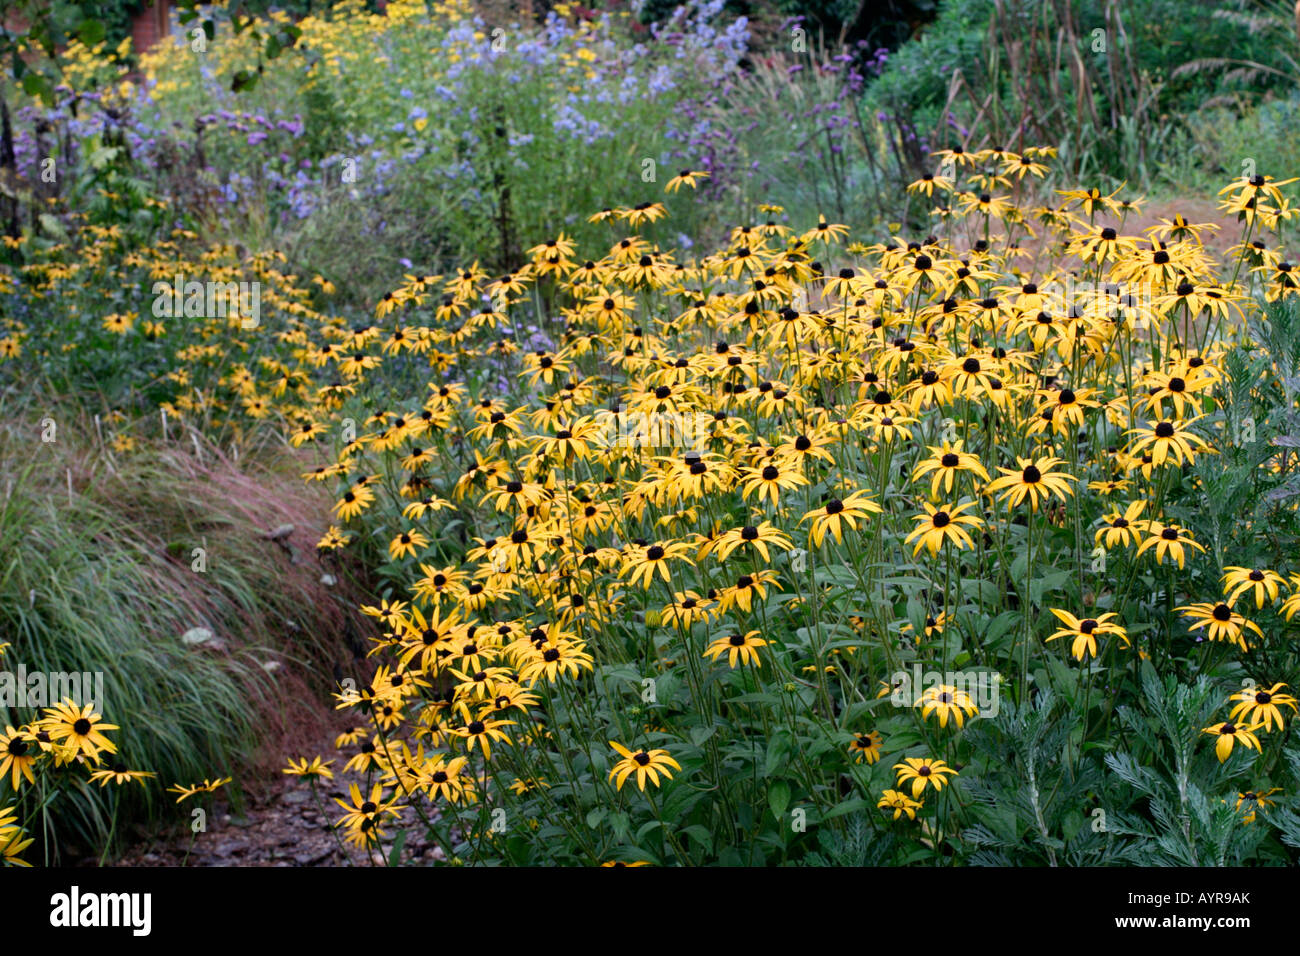 RUDBECKIA FULGIDA DEAMII PROVIDES MANY MONTHS OF INTEREST SHOWN HERE AT HOLBROOK GARDEN DEVON IN EARLY OCTOBER Stock Photo